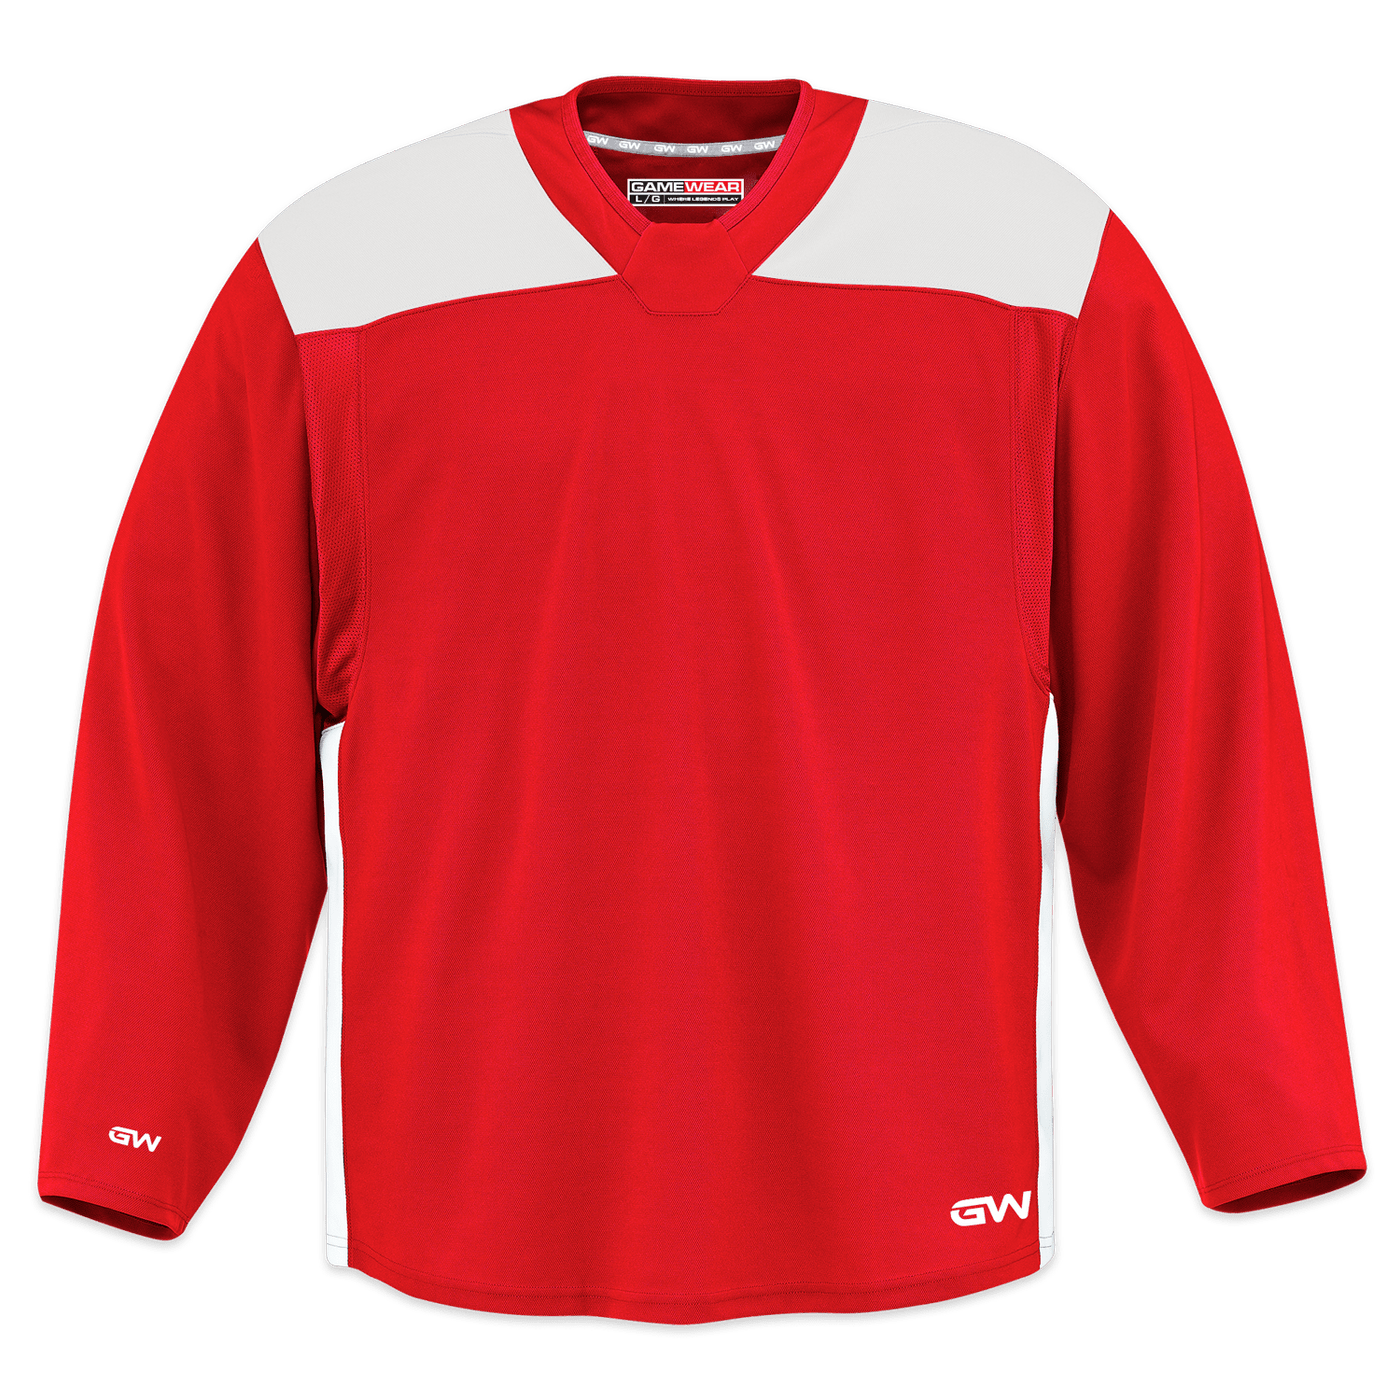 GameWear GW6500 ProLite Series Junior Hockey Practice Jersey - Red / White - The Hockey Shop Source For Sports